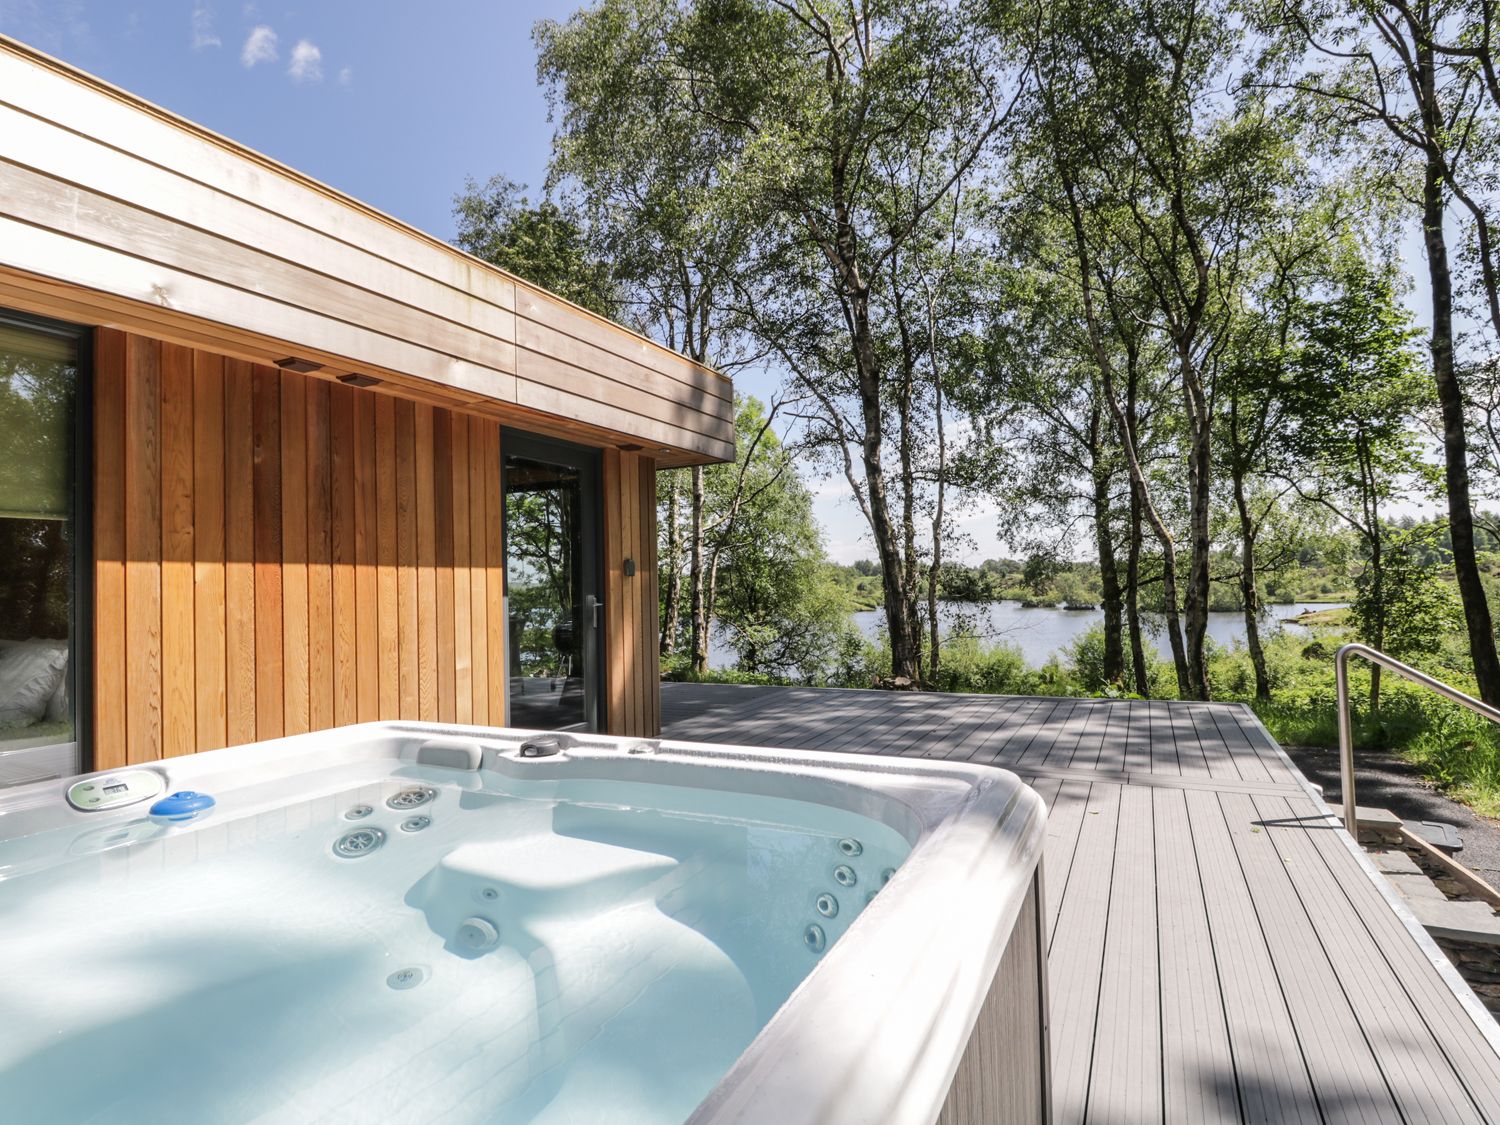 wonderful selection of lodges in Cumbria most of which have their own private hot tub